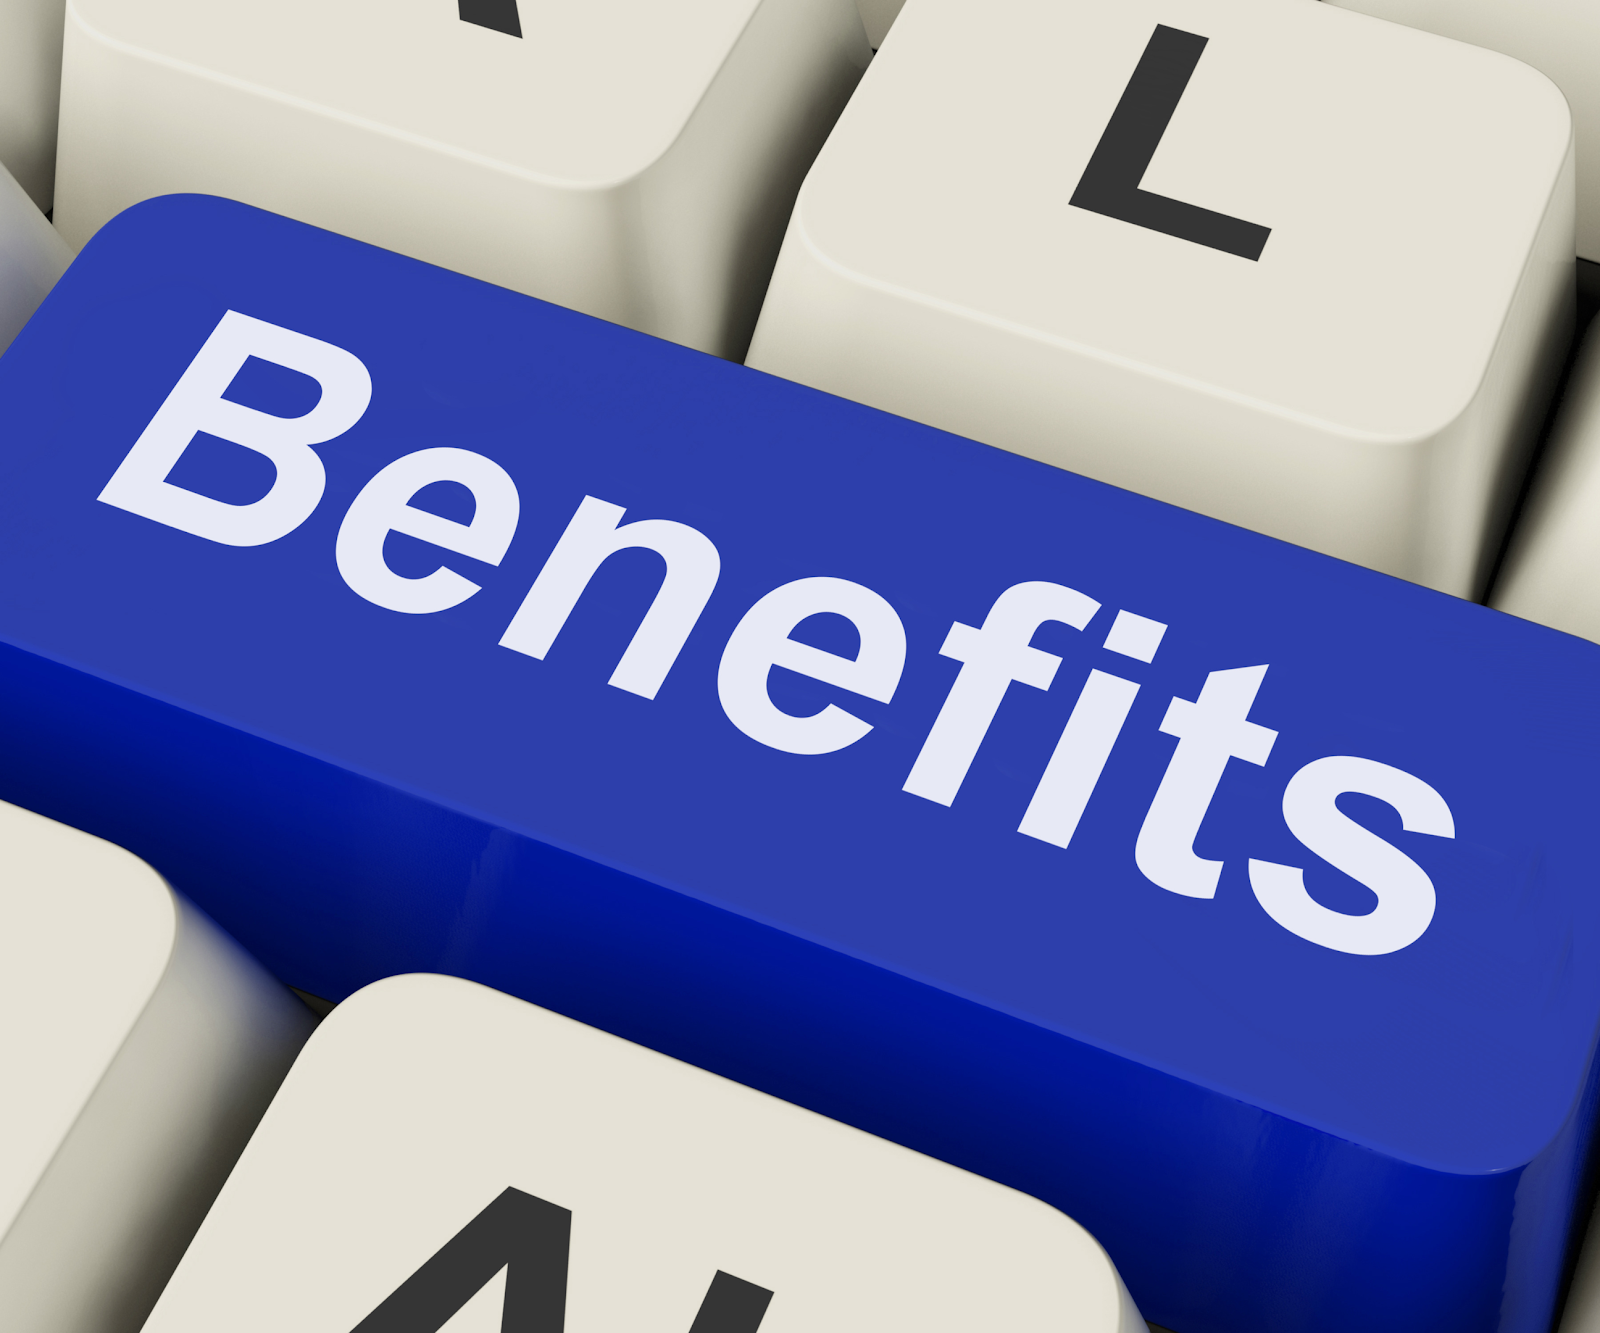 The word "Benefits" printed on top of a blue Keyboard key.